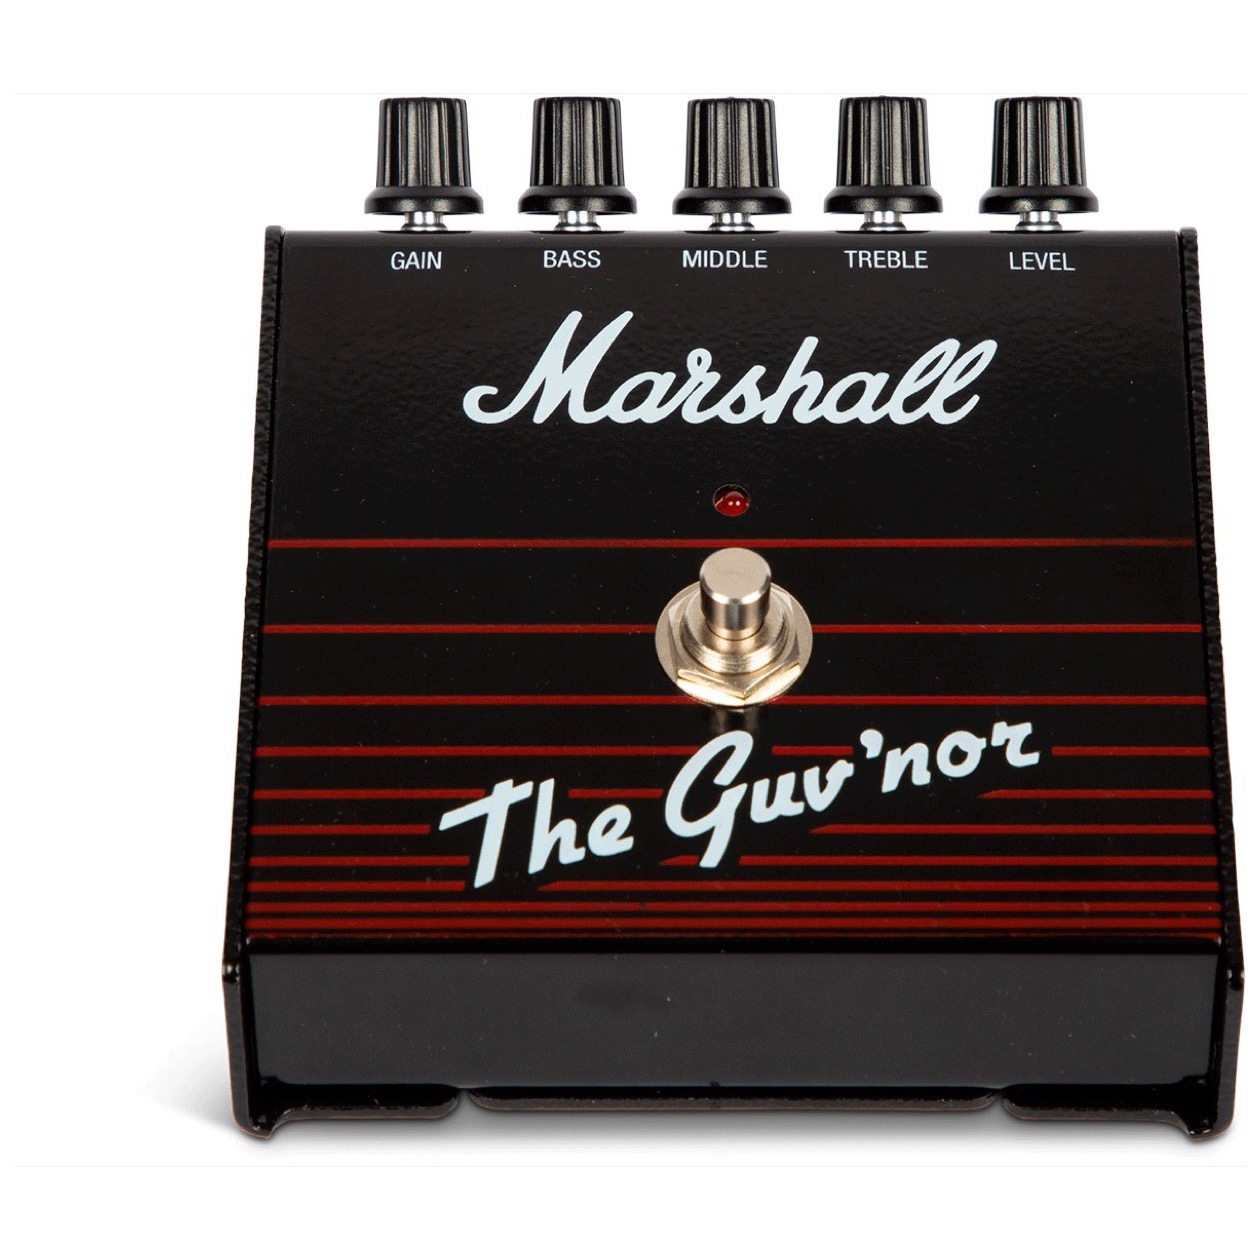 Marshall The Guv'nor Vintage Reissue Pedal NIEUW 2023 MODEL LEVERING JUNI 2023 !